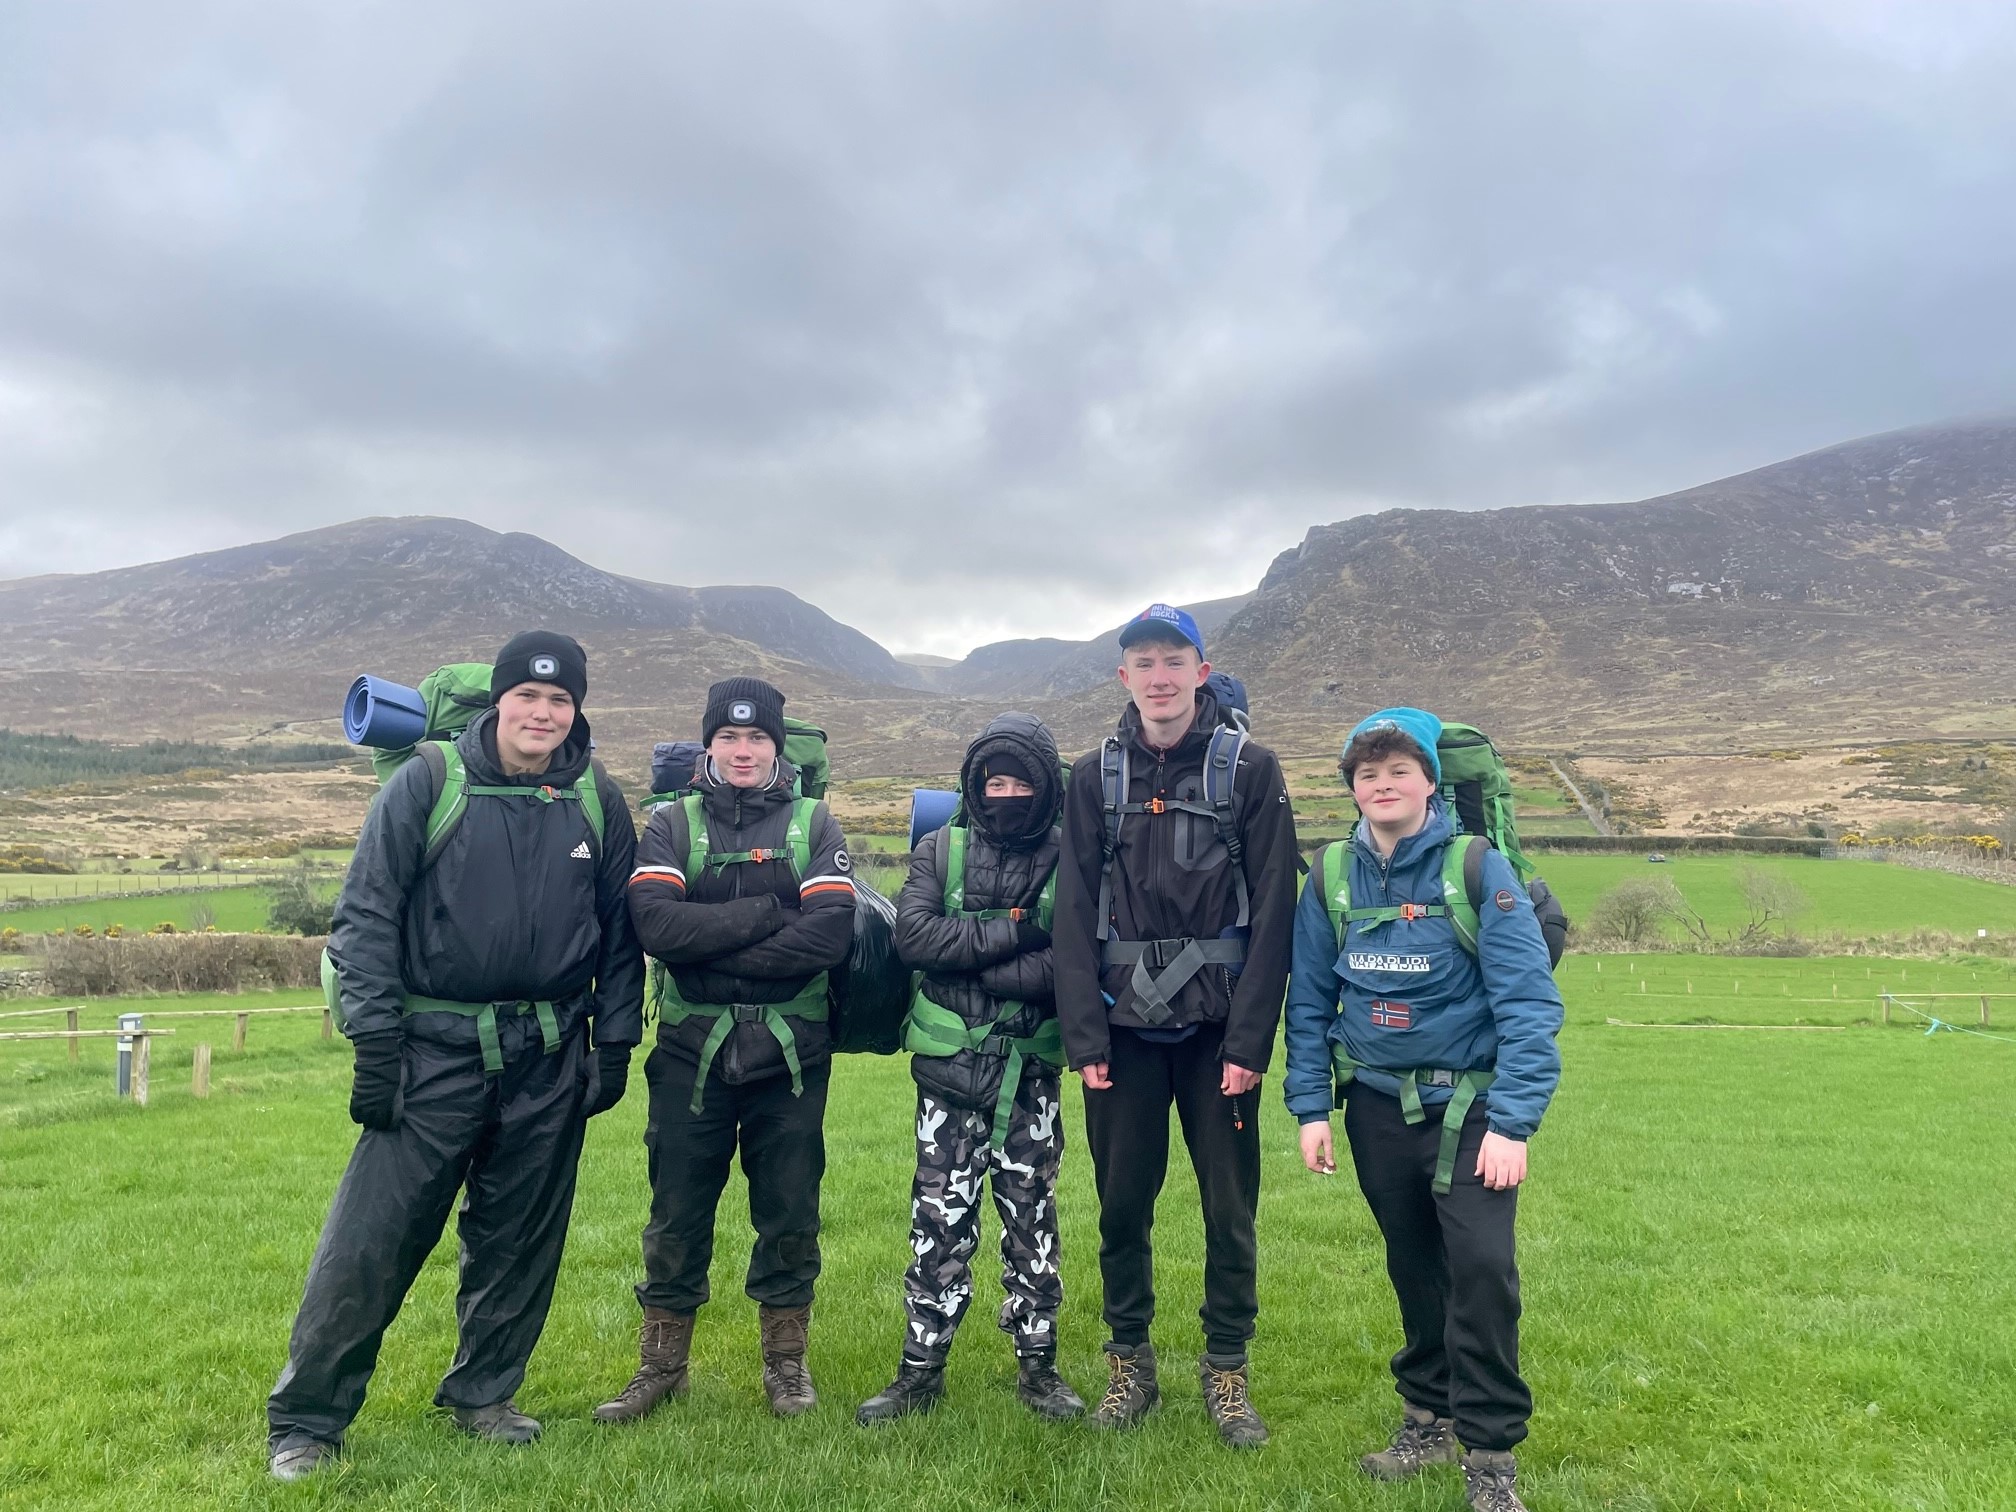 Five people standing wearing hiking clothing and backpacks with the Mourne Mountains in the background.